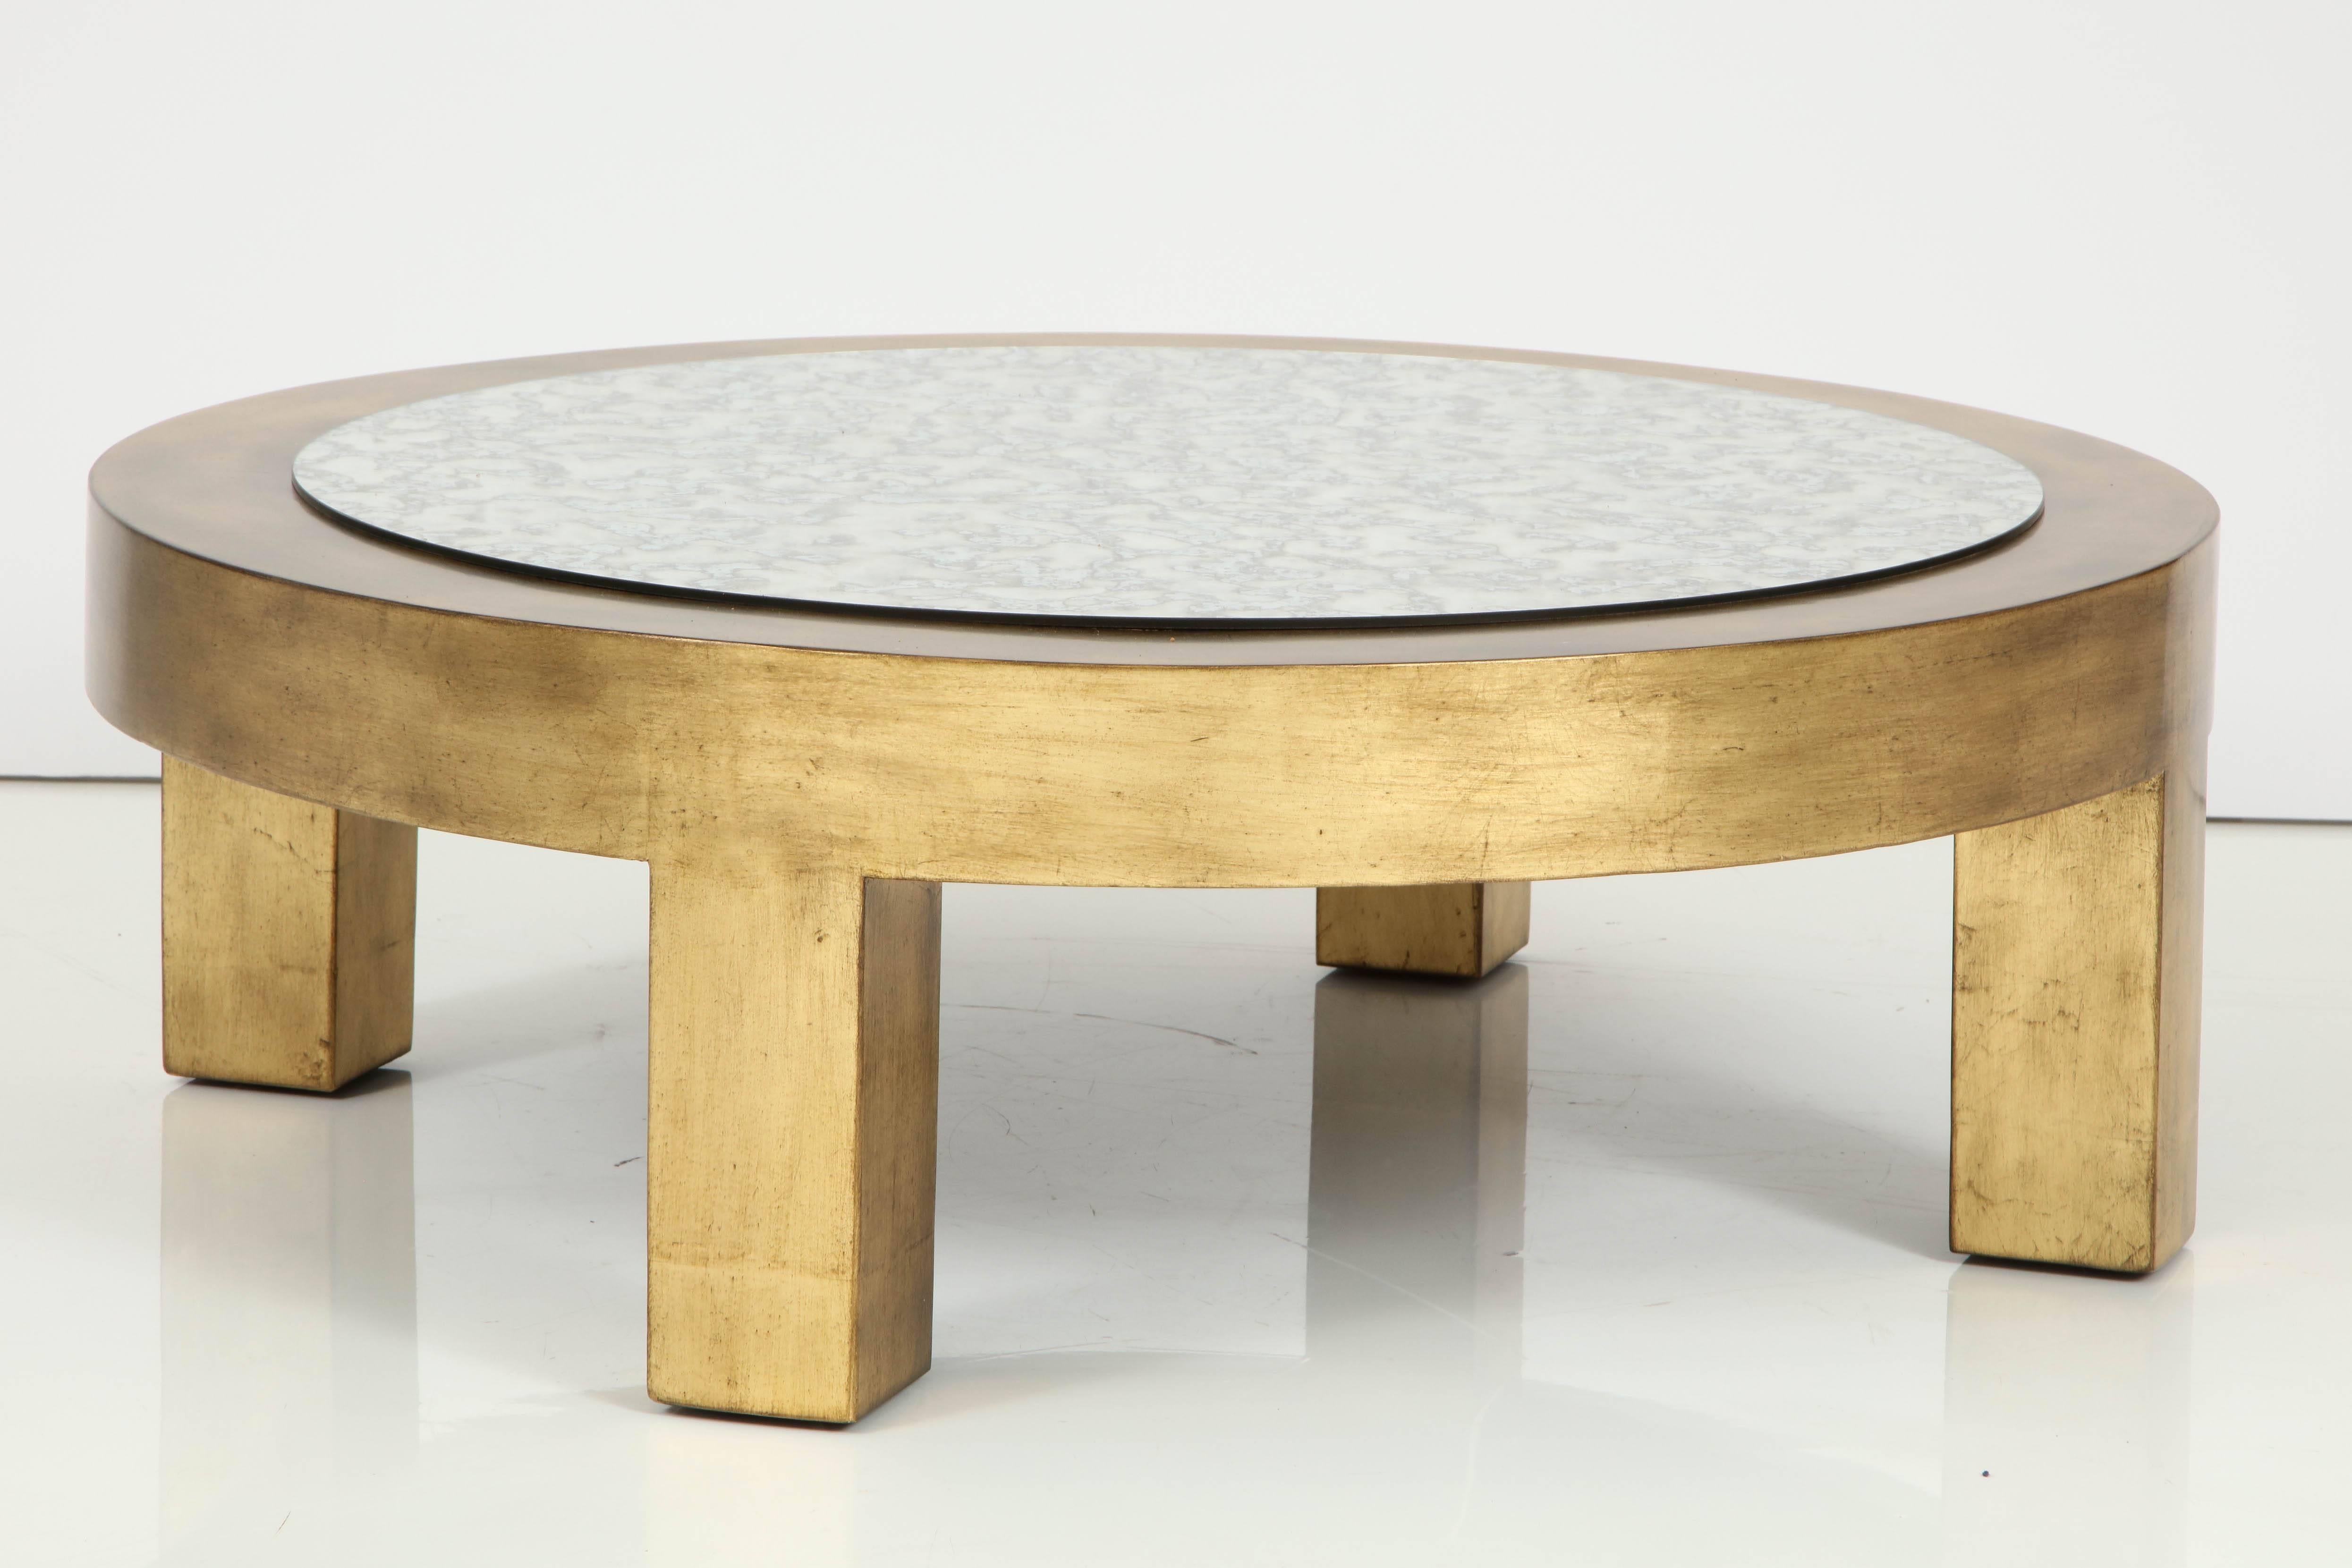 James Mont hand gilded circular coffee table with a smoked eglomise mirror top. The perfect finishing statement for any traditional, glam or modern room. Mint restored.